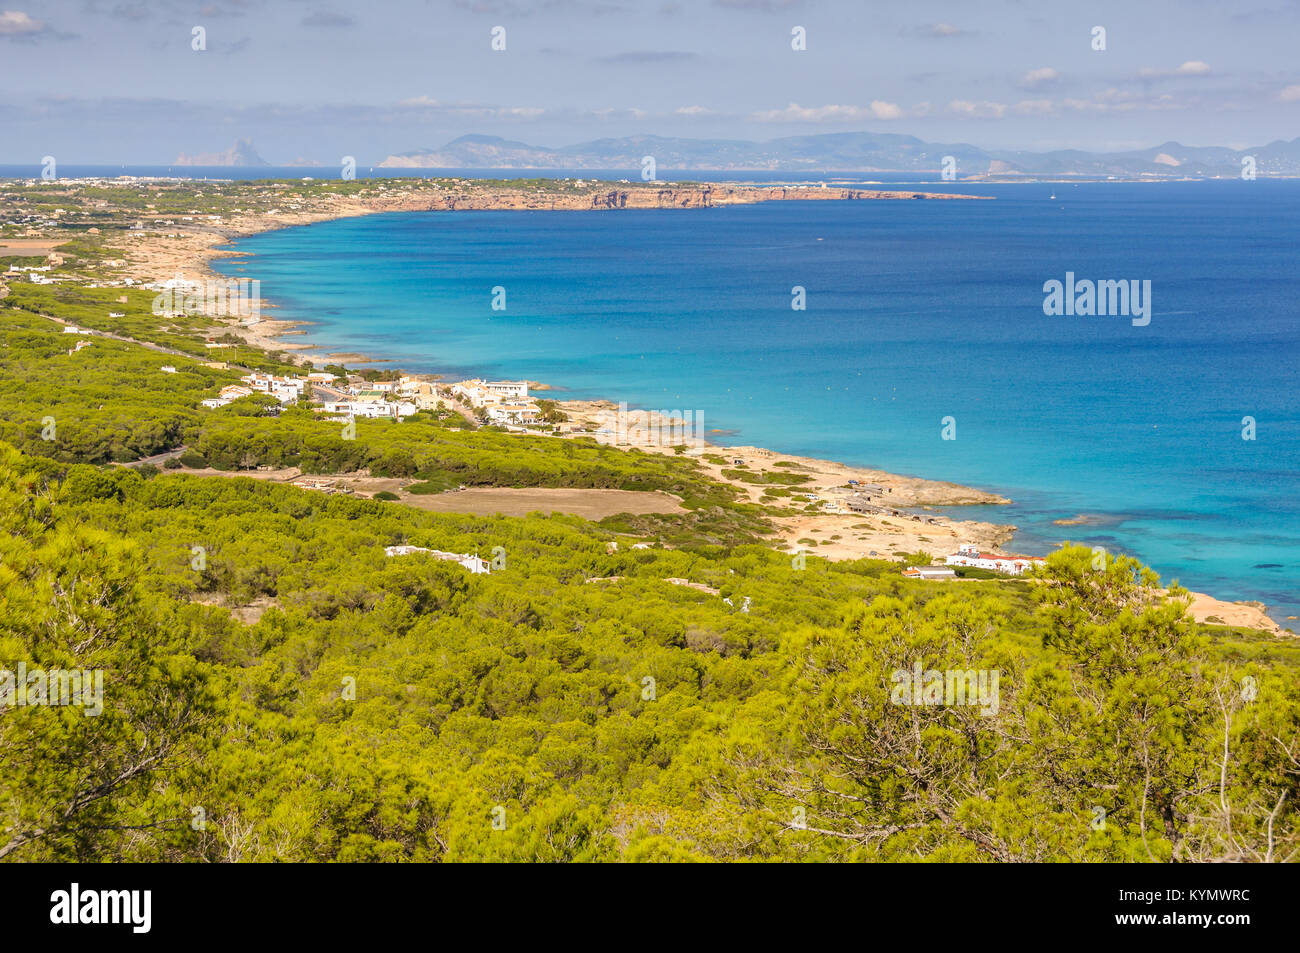 Aerial view of the coastline in Formentera Island, Spain Stock Photo